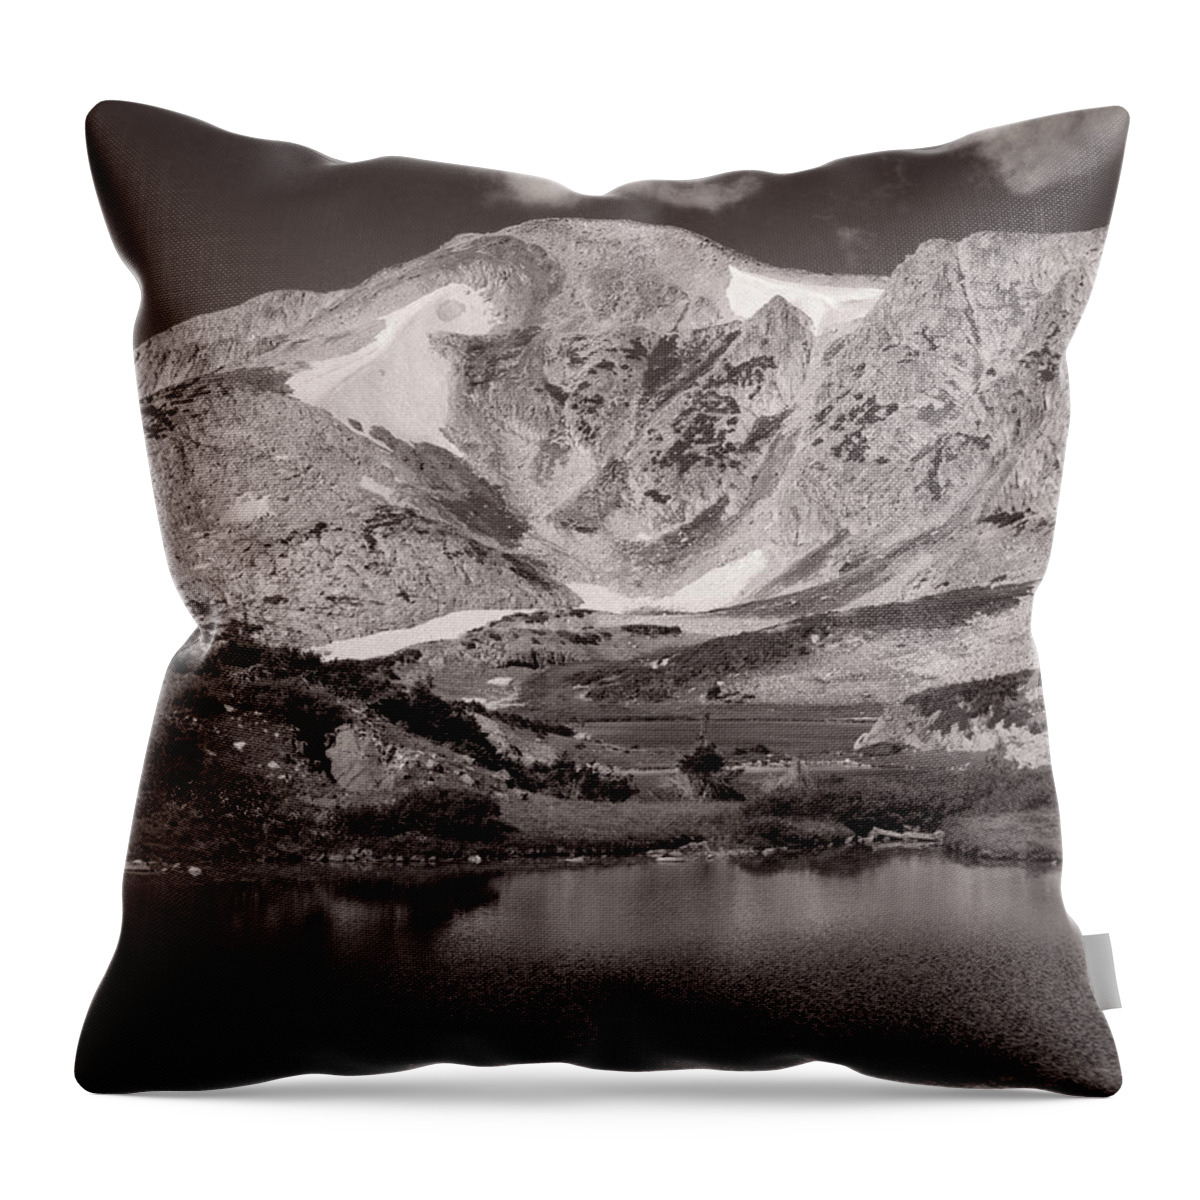 Snowy Range Throw Pillow featuring the photograph Snowy Range Lake, Wyoming by Jeff White